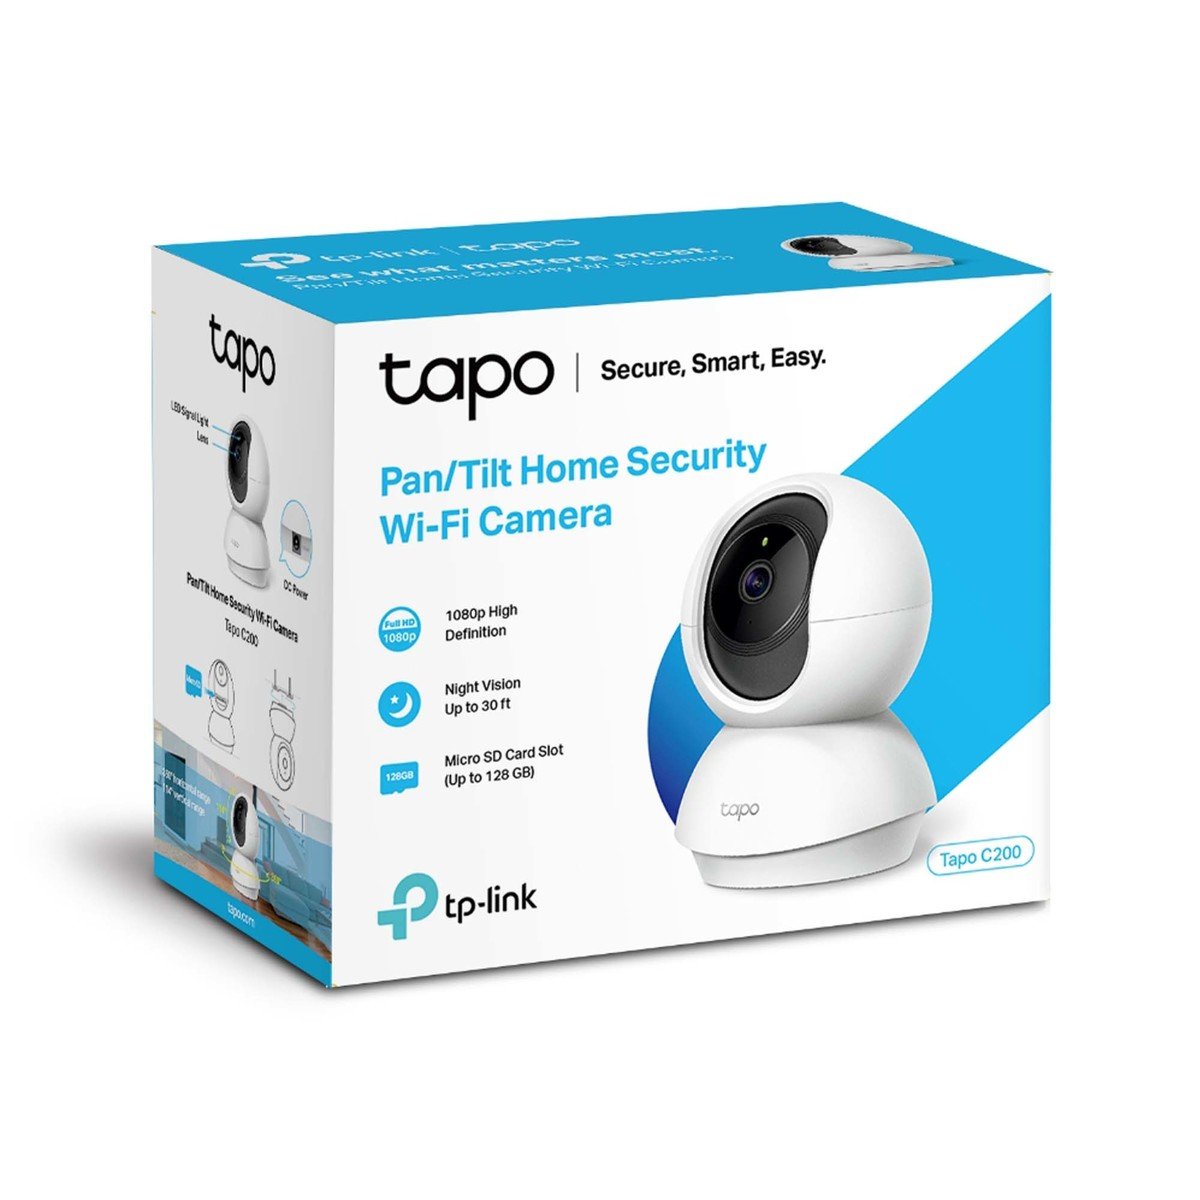 TP-Link Pan Tilt Home Security Wifi Wireless Camera Tapo C200